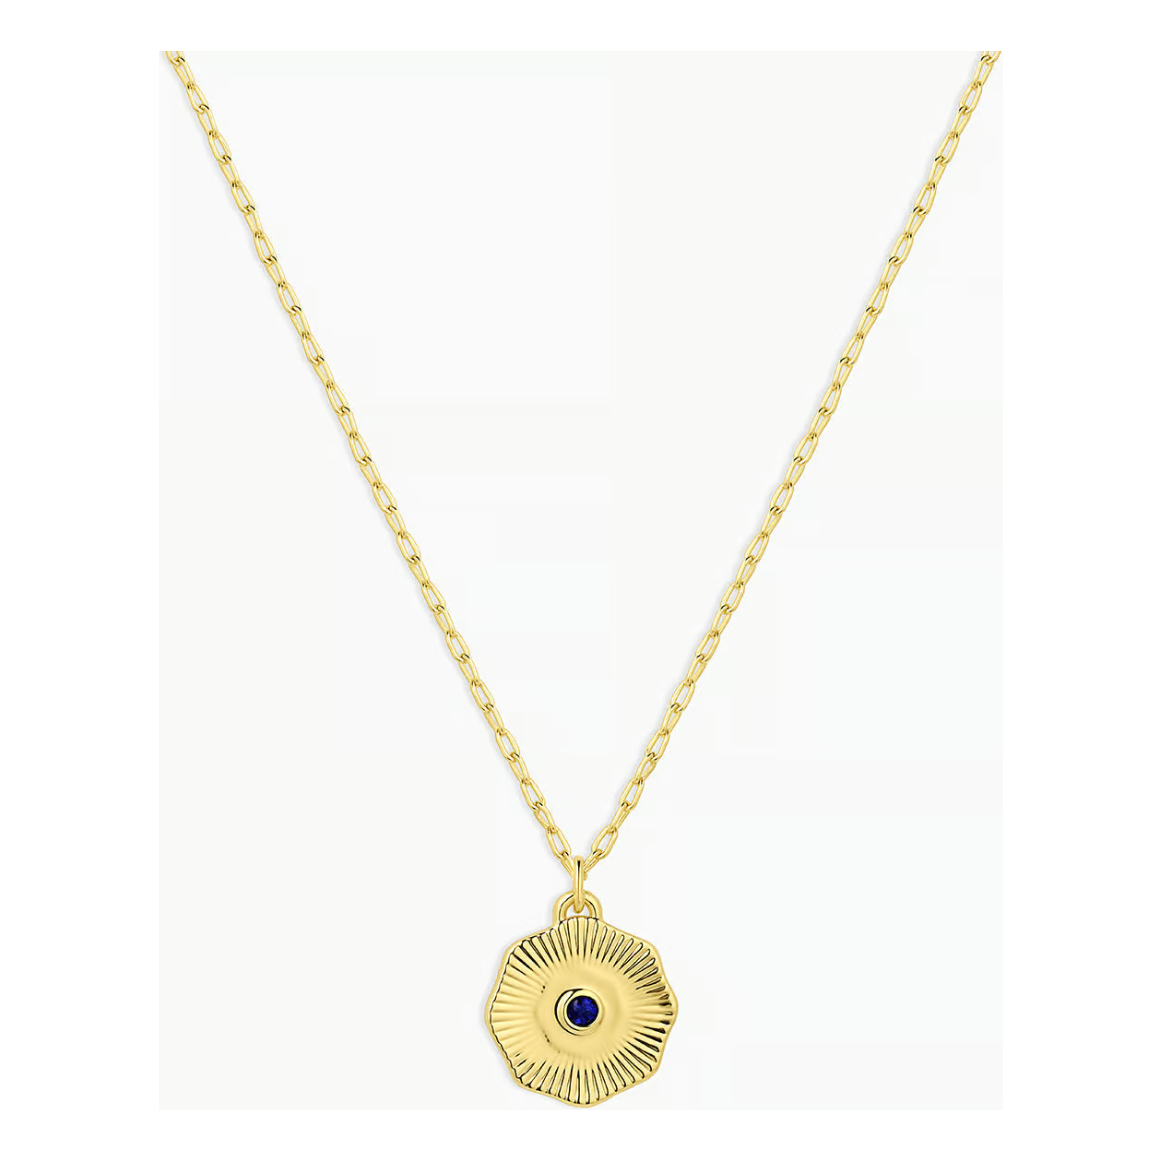 Birthstone Coin Necklace - September